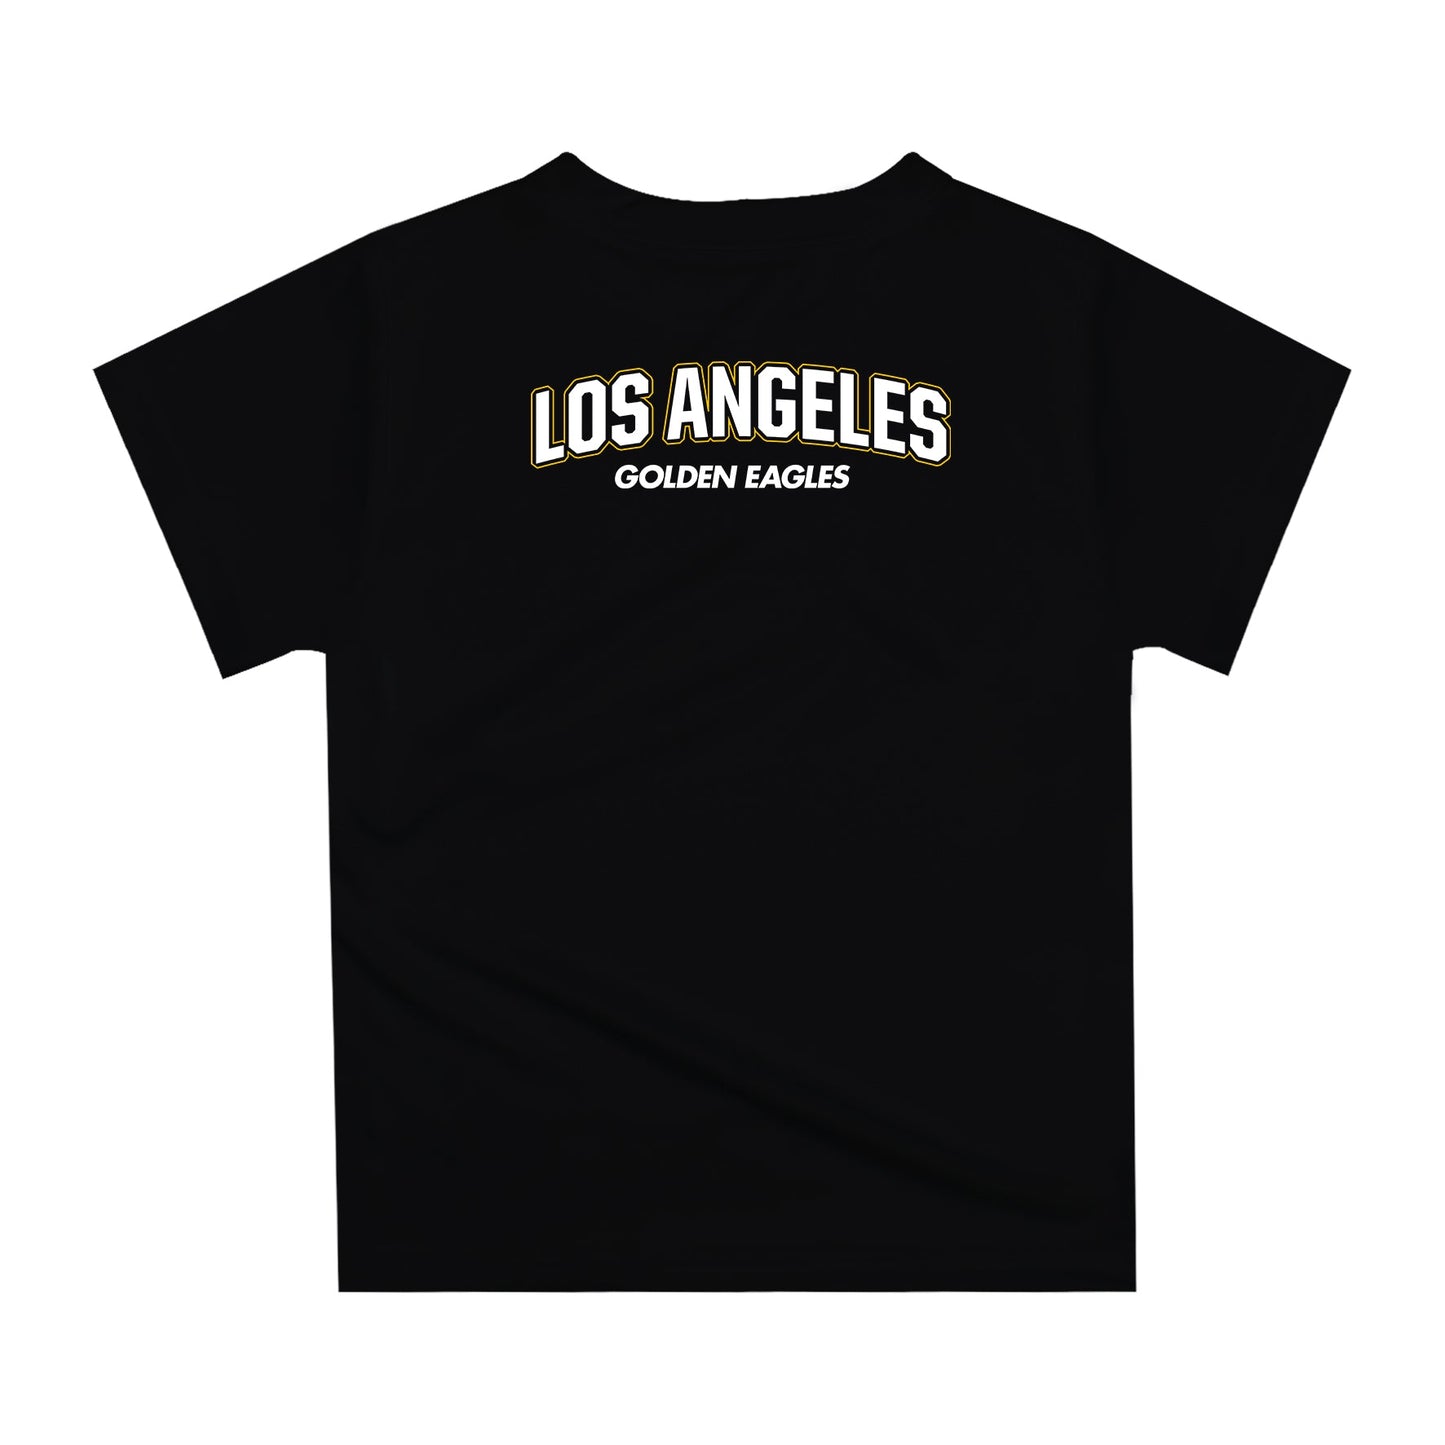 Cal State Los Angeles Golden Eagles Original Dripping Basketball Black T-Shirt by Vive La Fete